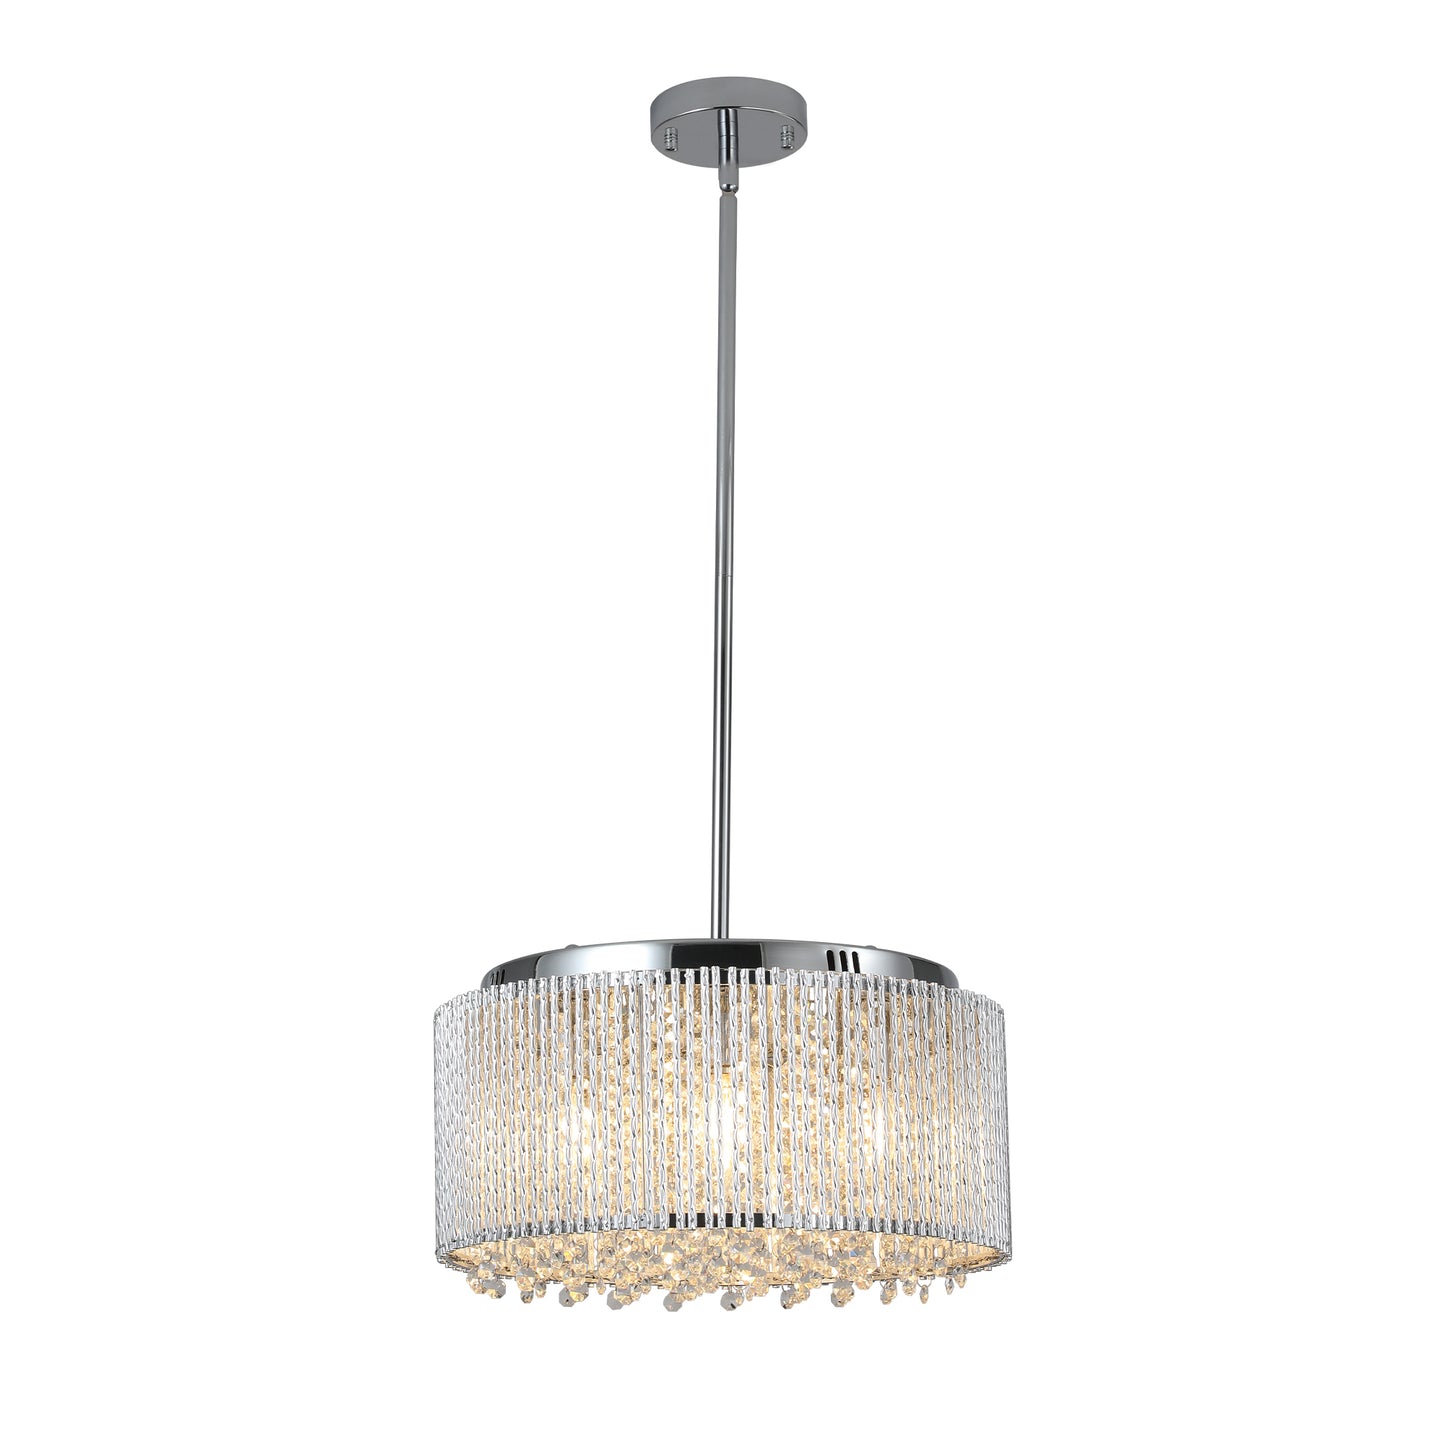 Modern Crystal Chandelier for Living-Room Round Cristal Lamp Luxury Home Decor Light Fixture - Enova Luxe Home Store